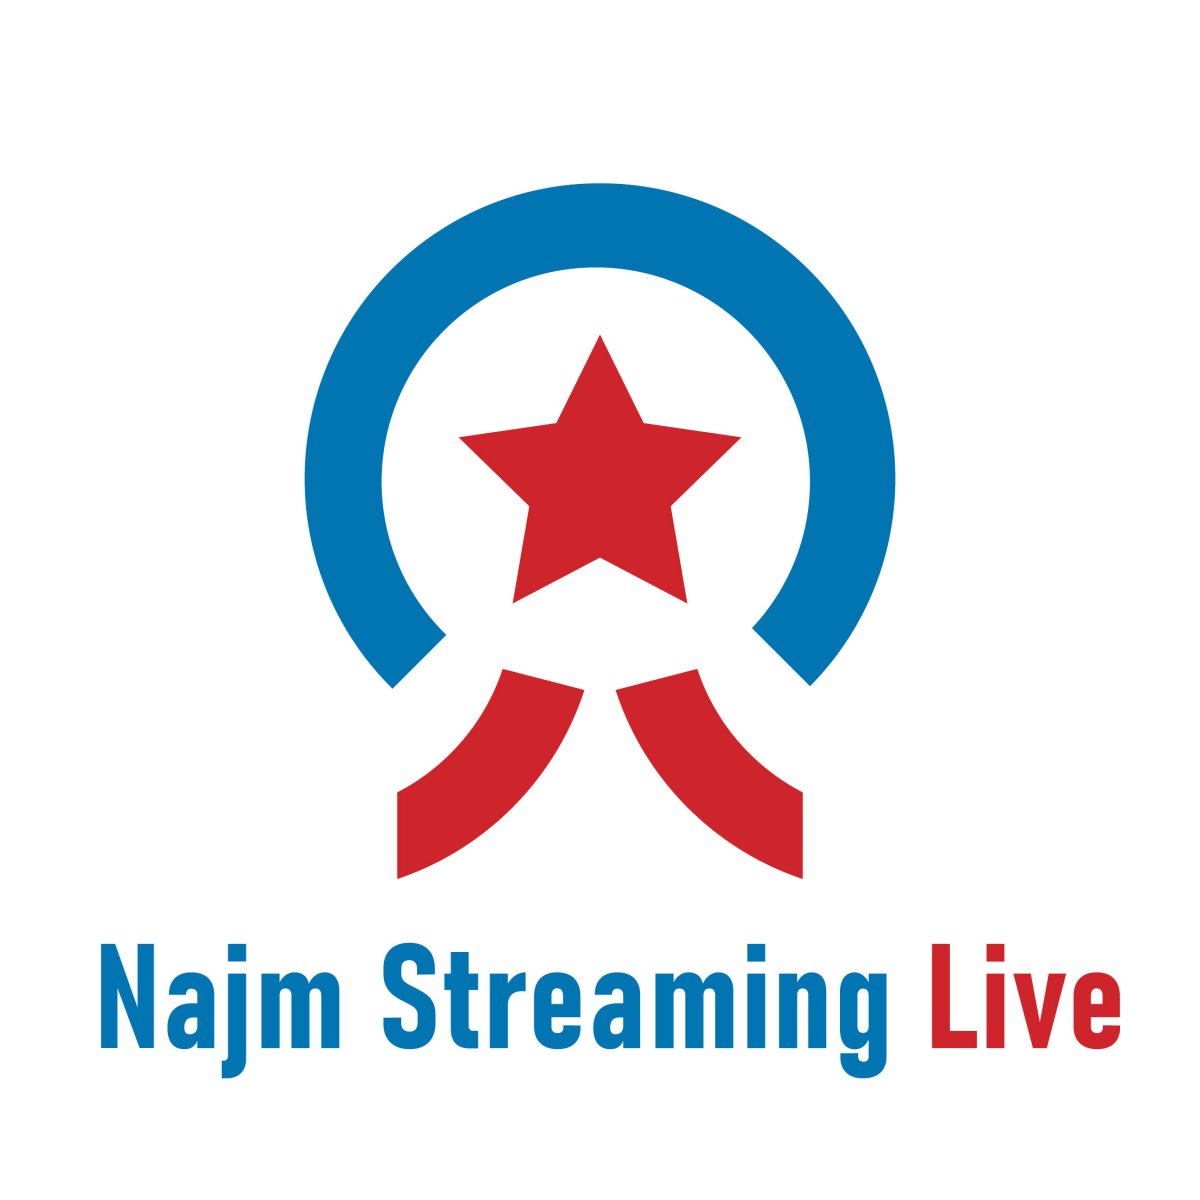 Streaming Live